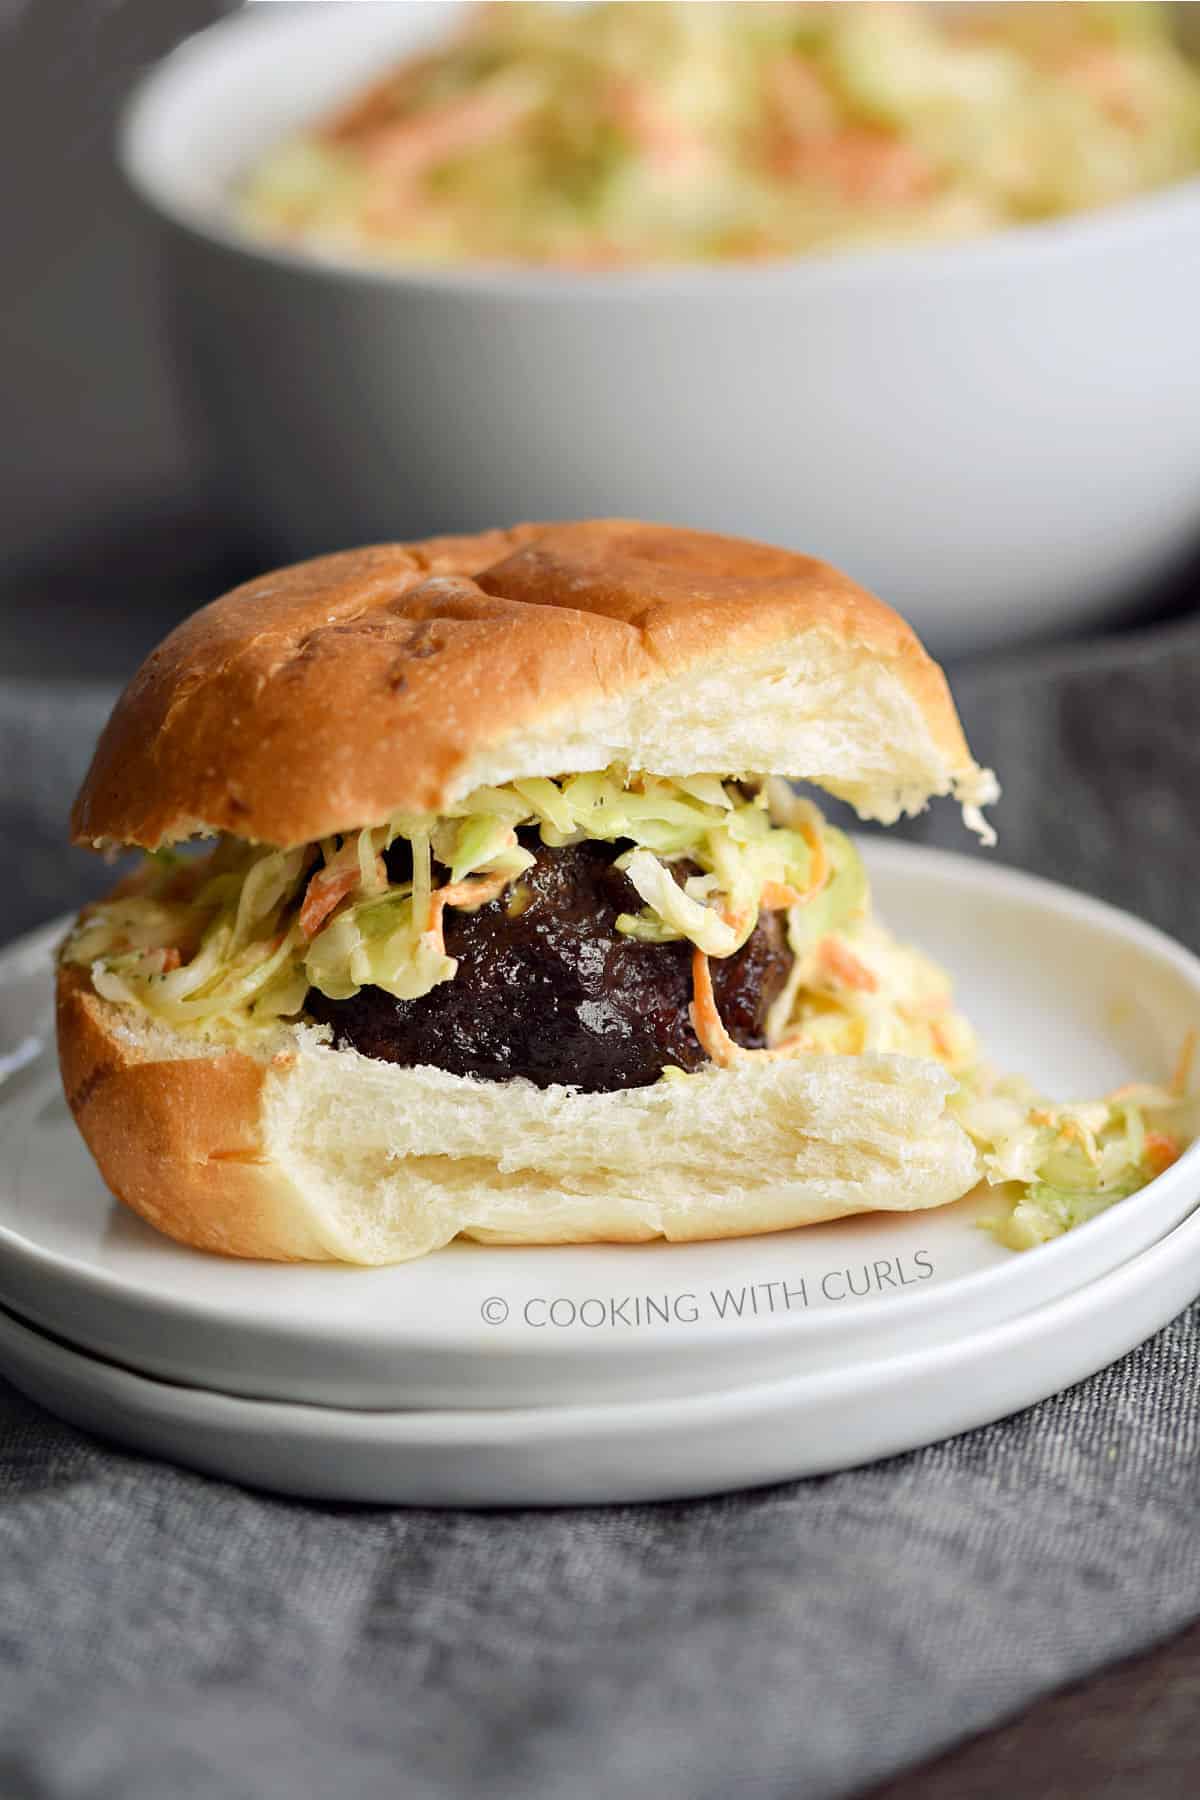 Meatball topped with coleslaw and a cocktail bun.